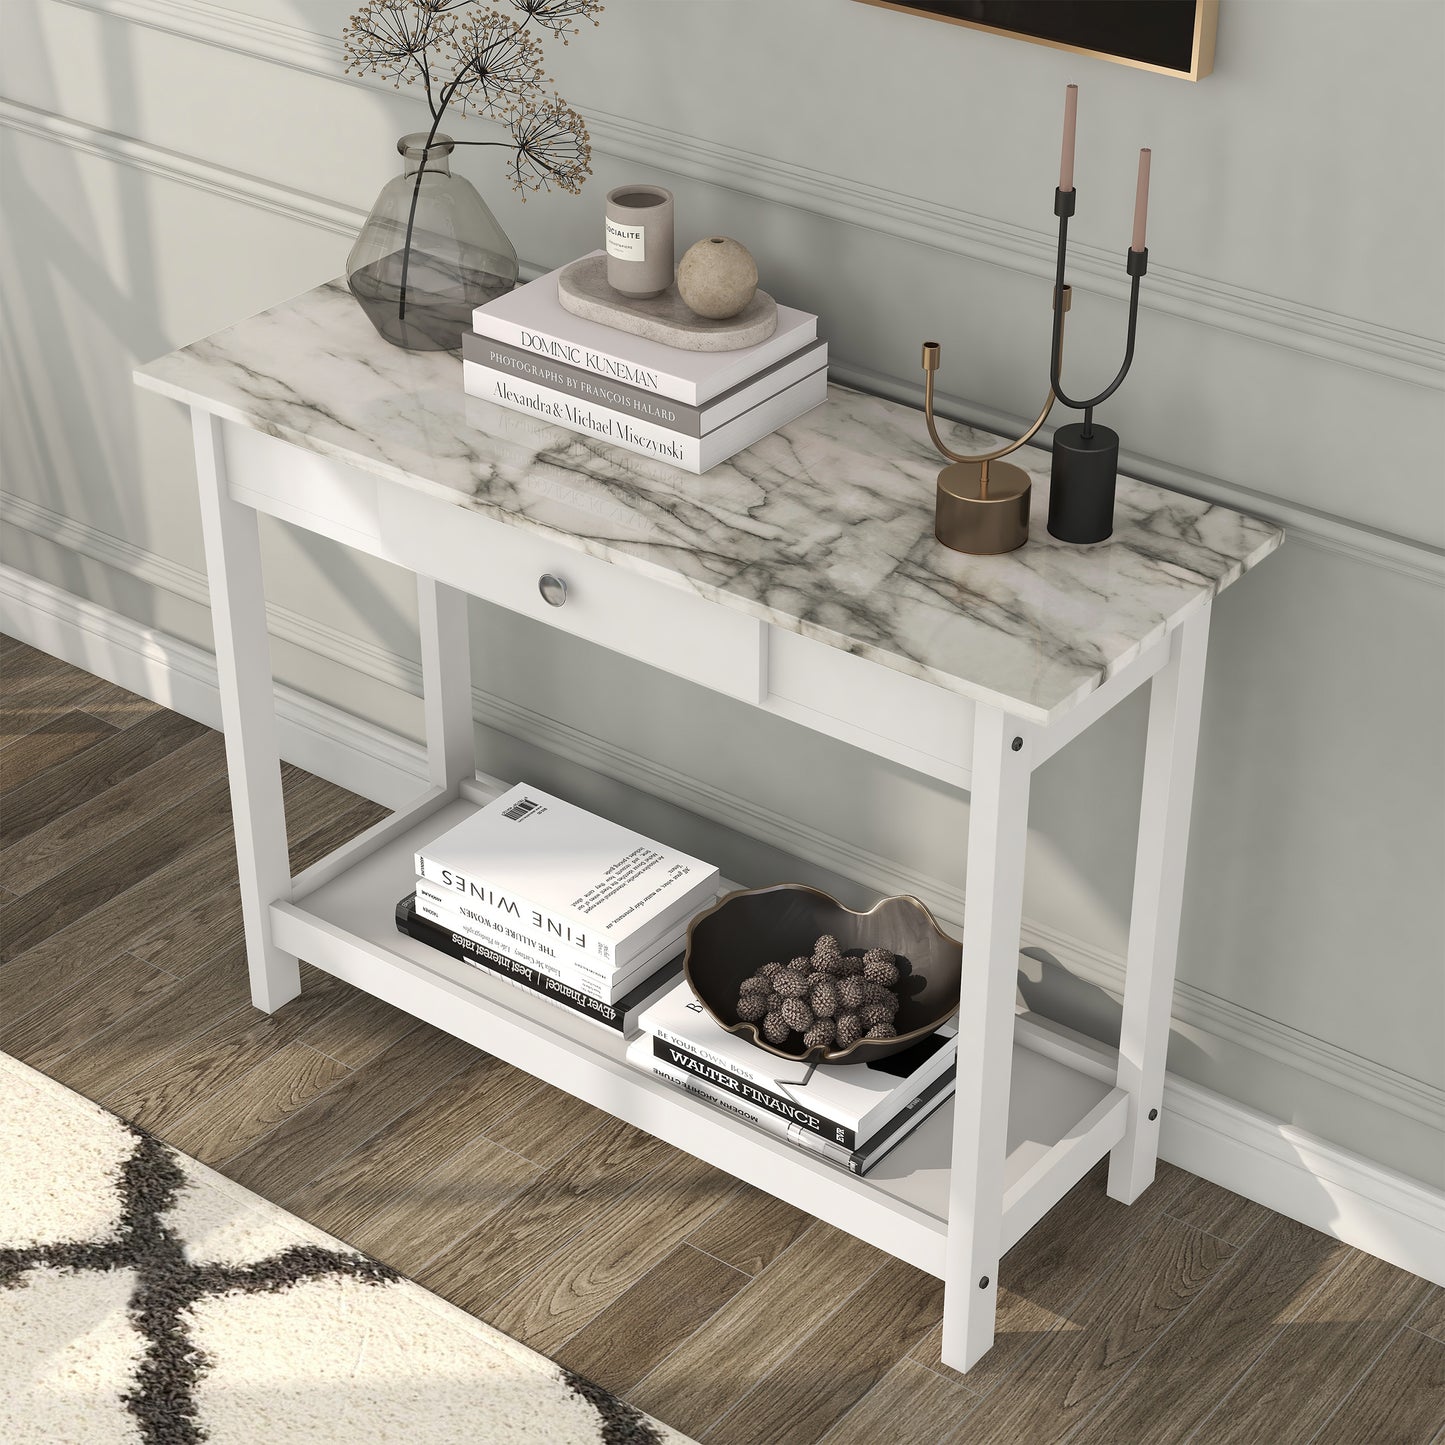 Left angled bird's eye view of a modern white and faux marble console table with a lower shelf in a living area with accessories